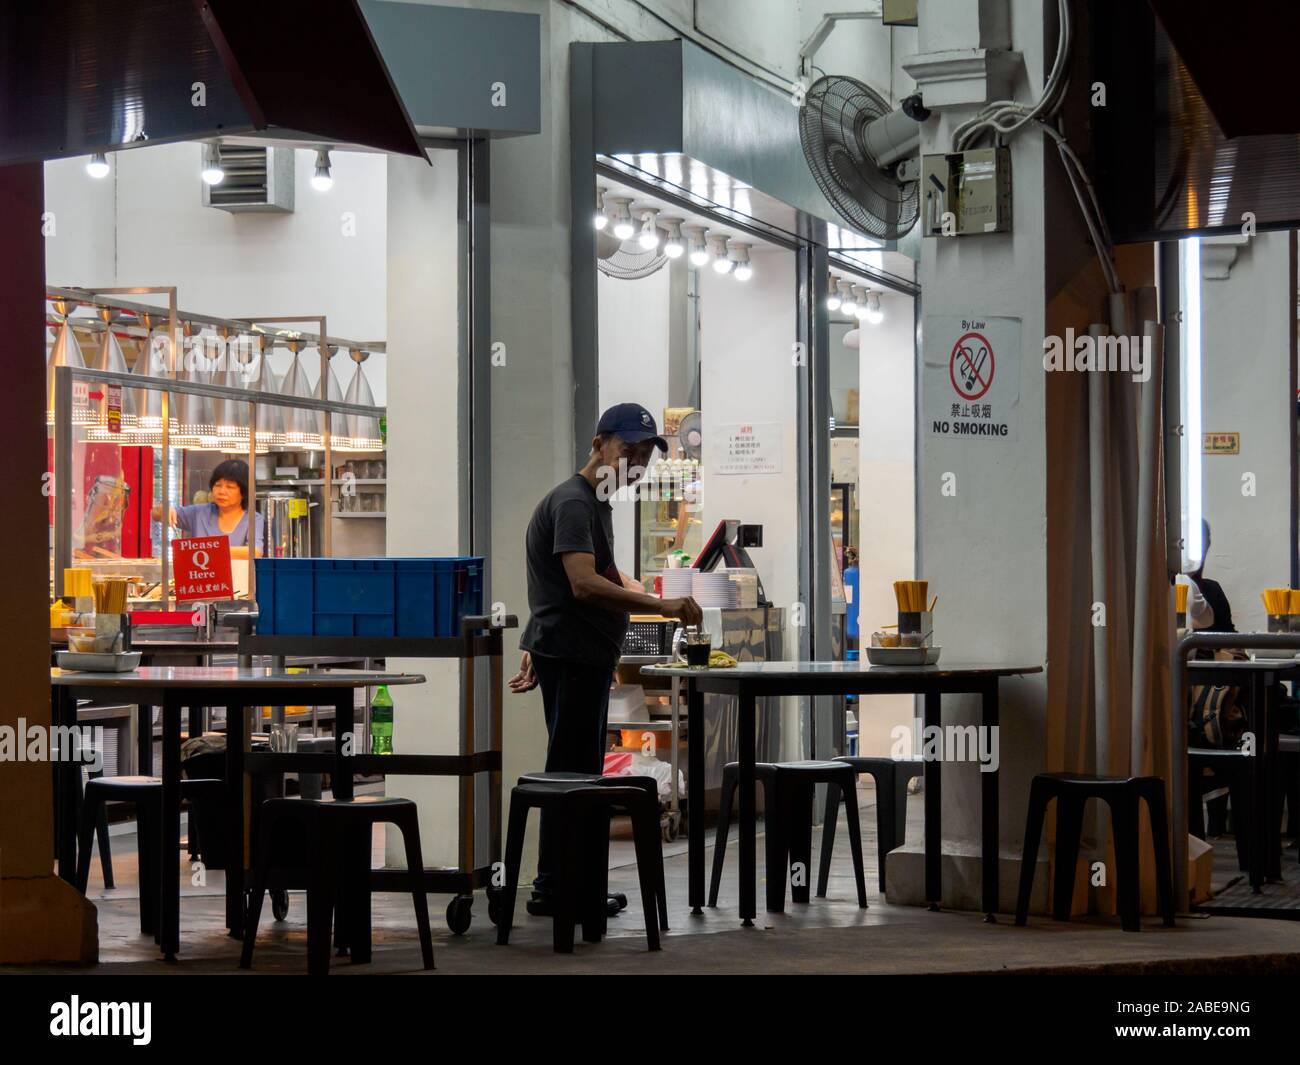 SINGAPORE - 16 MAR 2019 - A elderly Asian Chinese Singaporean male employee at a late-night eatery / coffeeshop / kopitiam enjoys a cup of coffee afte Stock Photo